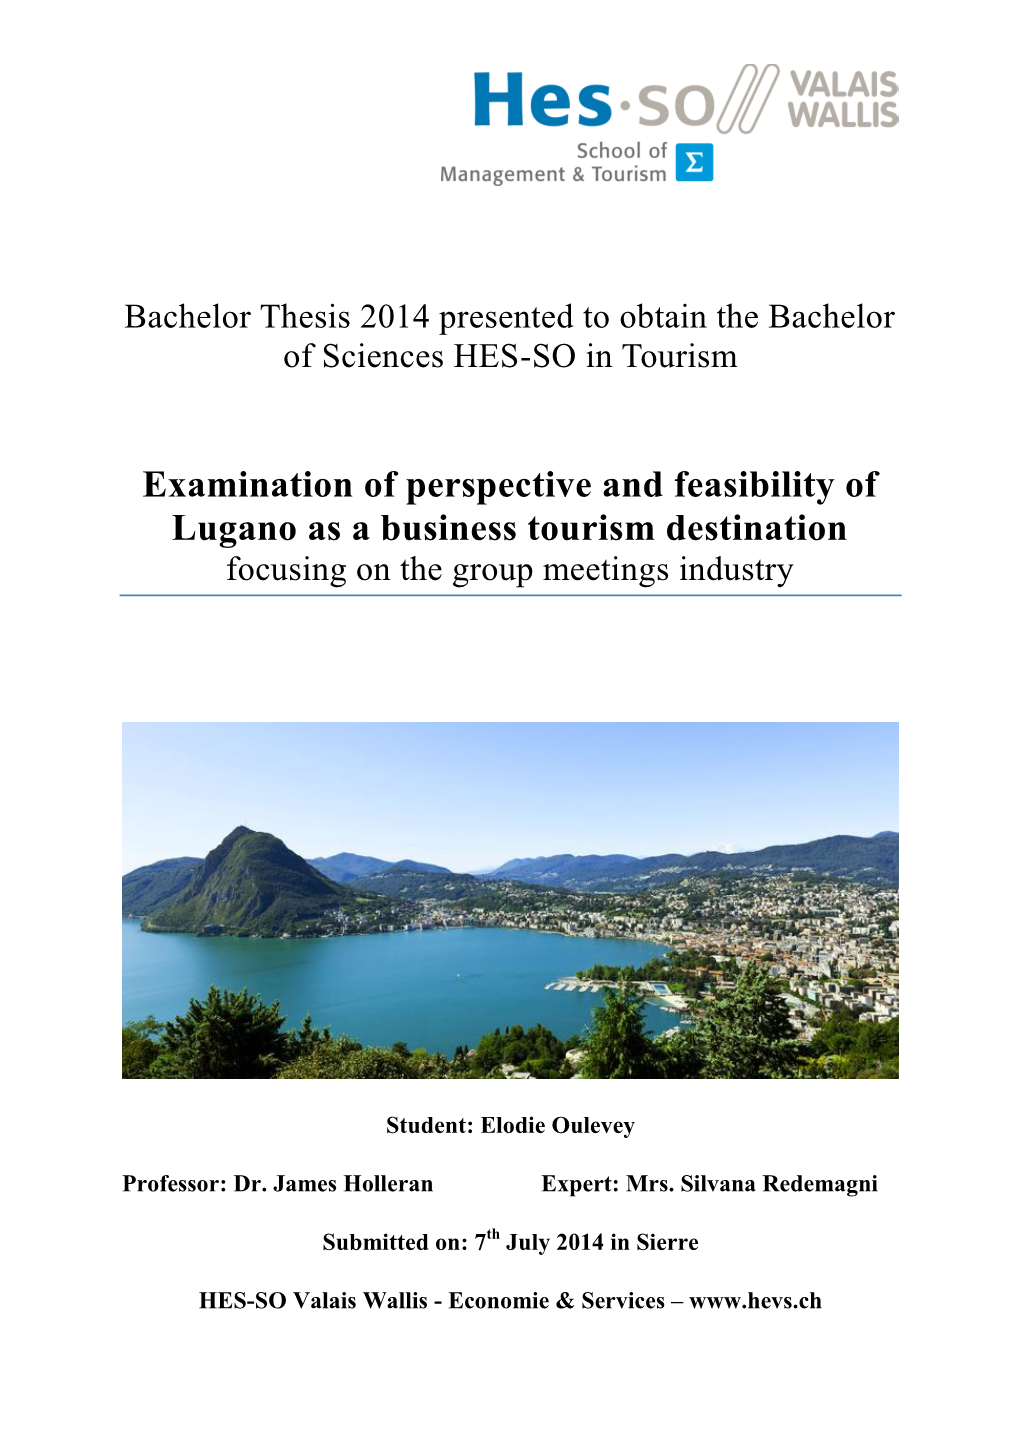 Examination of Perspective and Feasibility of Lugano As a Business Tourism Destination Focusing on the Group Meetings Industry